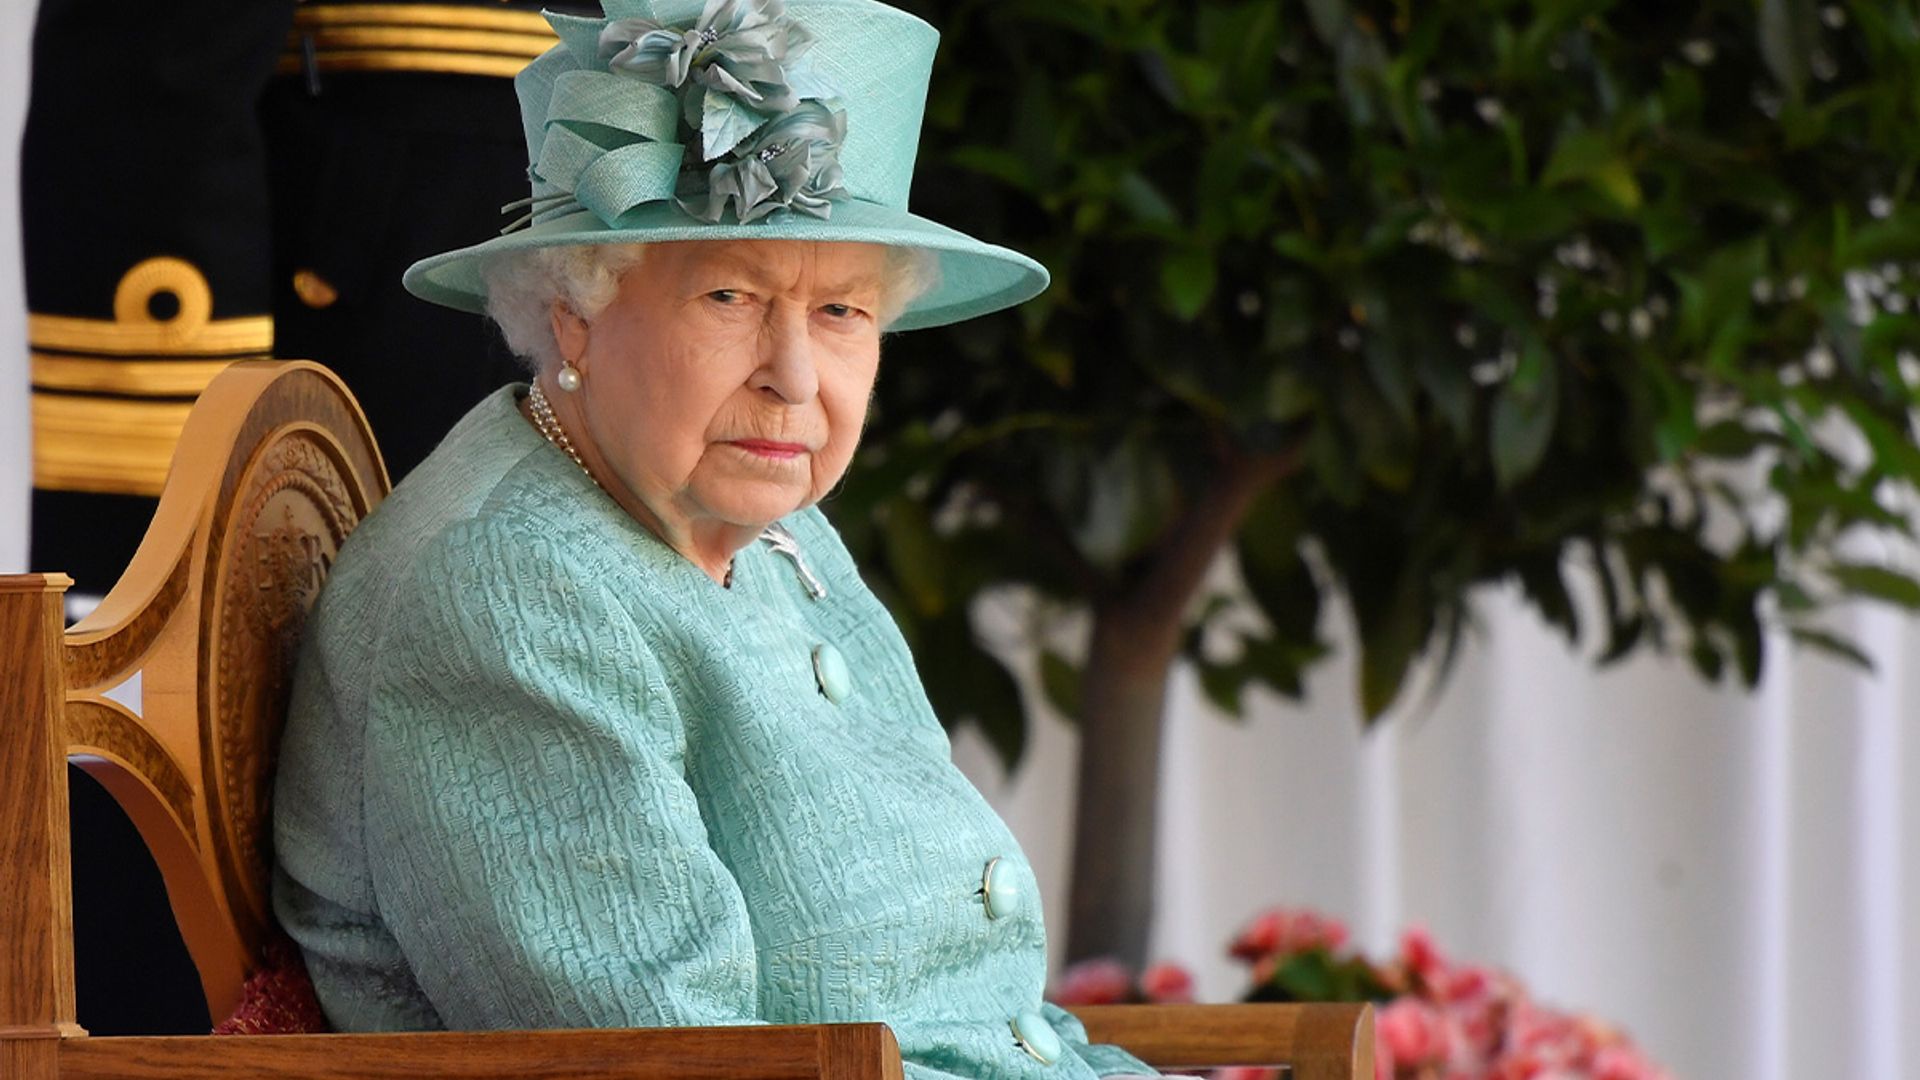 The Queen to have rota of royal visitors at Windsor Castle home | HELLO!